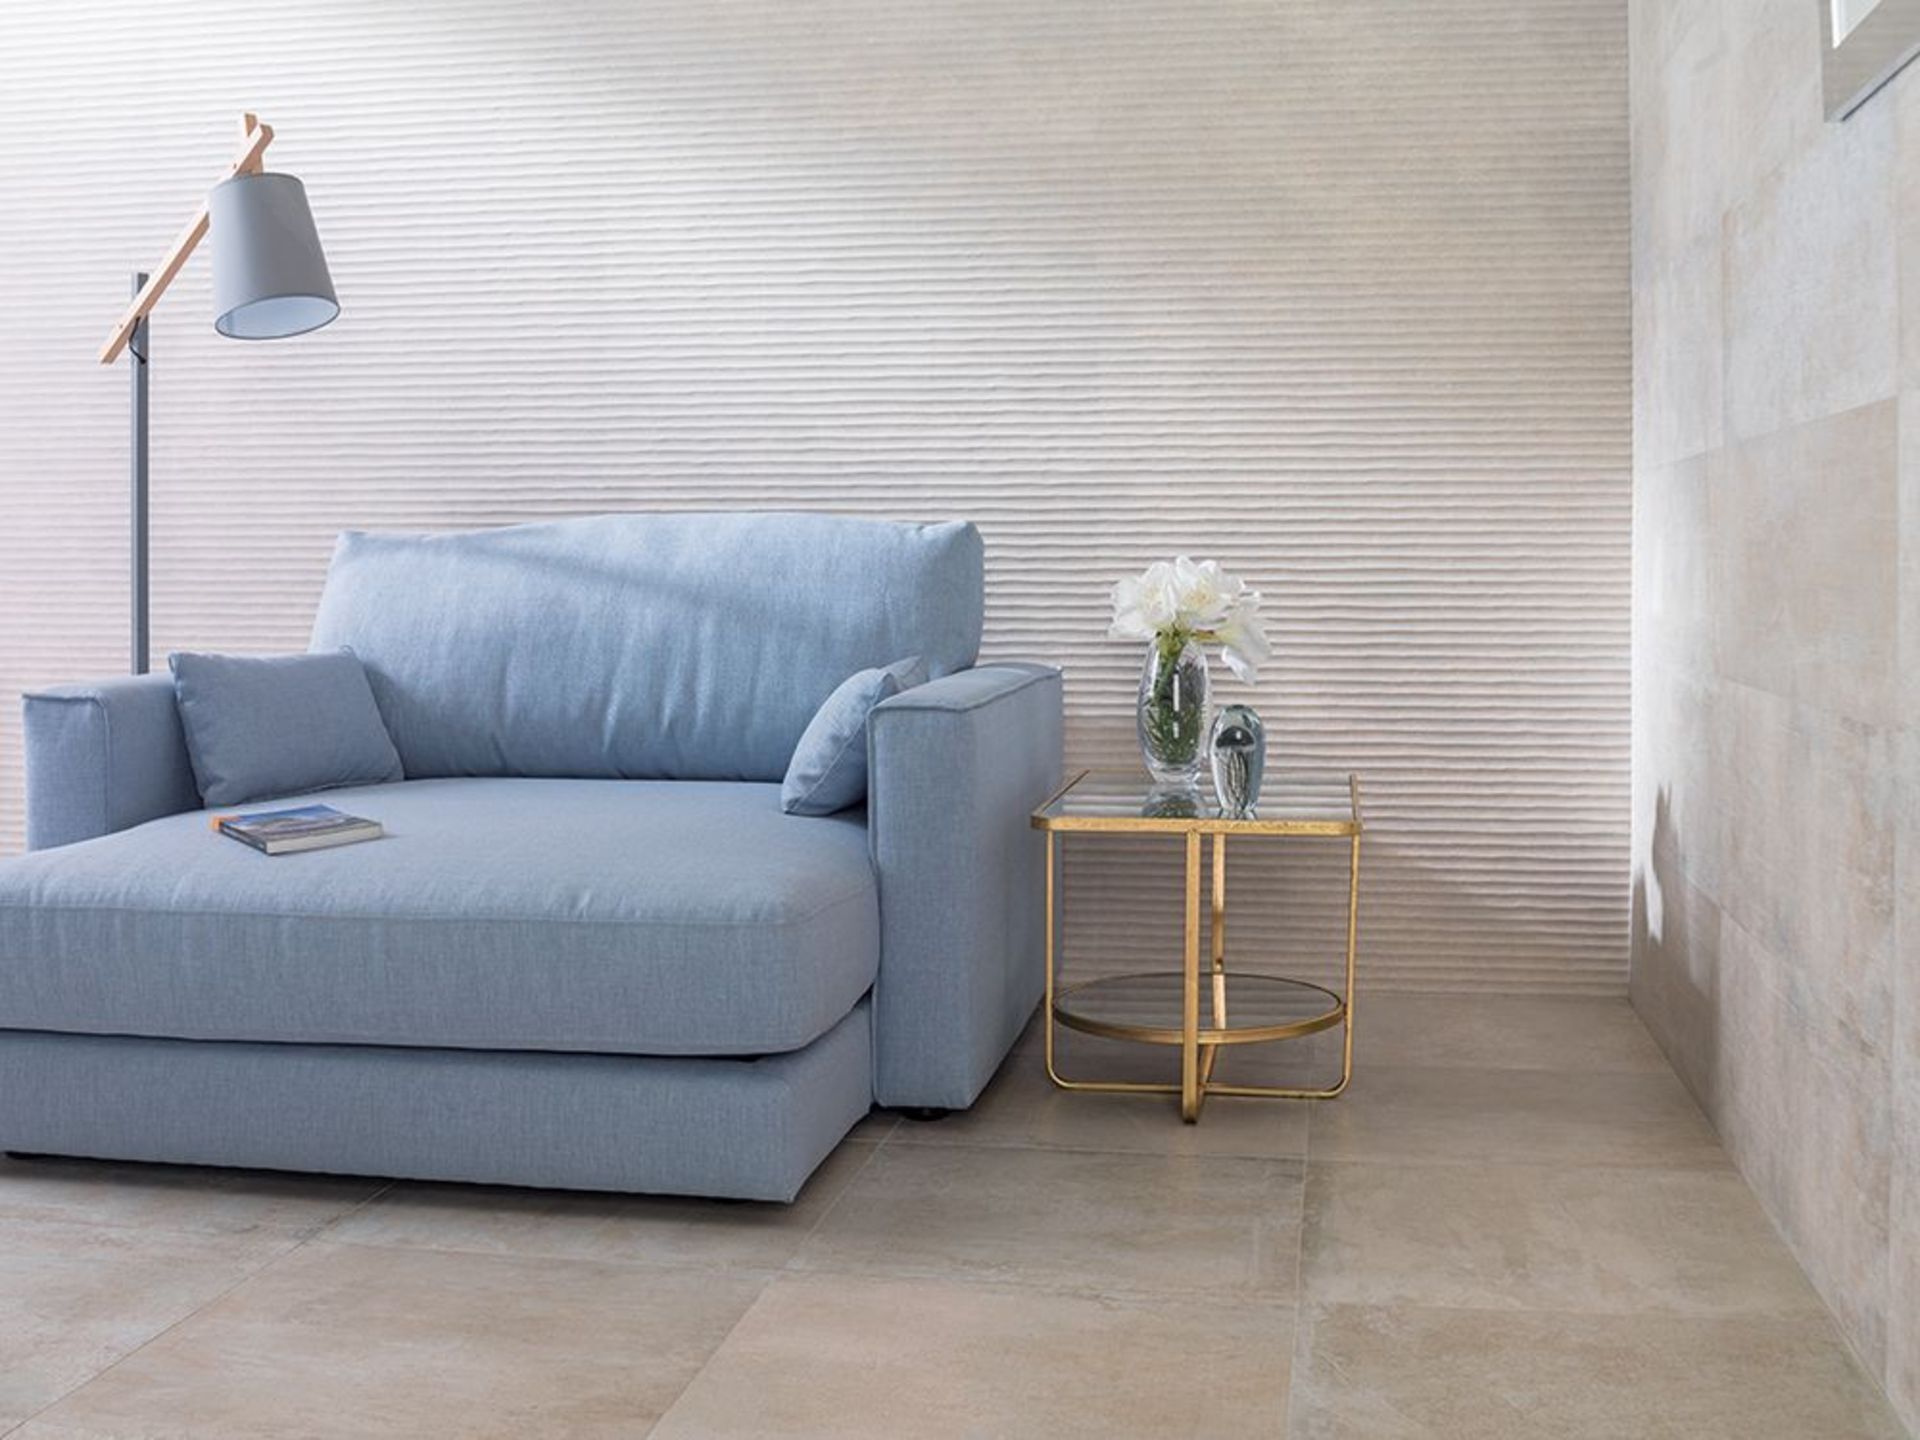 9.9 Square Meters of Porcelanosa Old Natural Wall and Floor Textured Tiles. 33.3x59.2cm per tile.